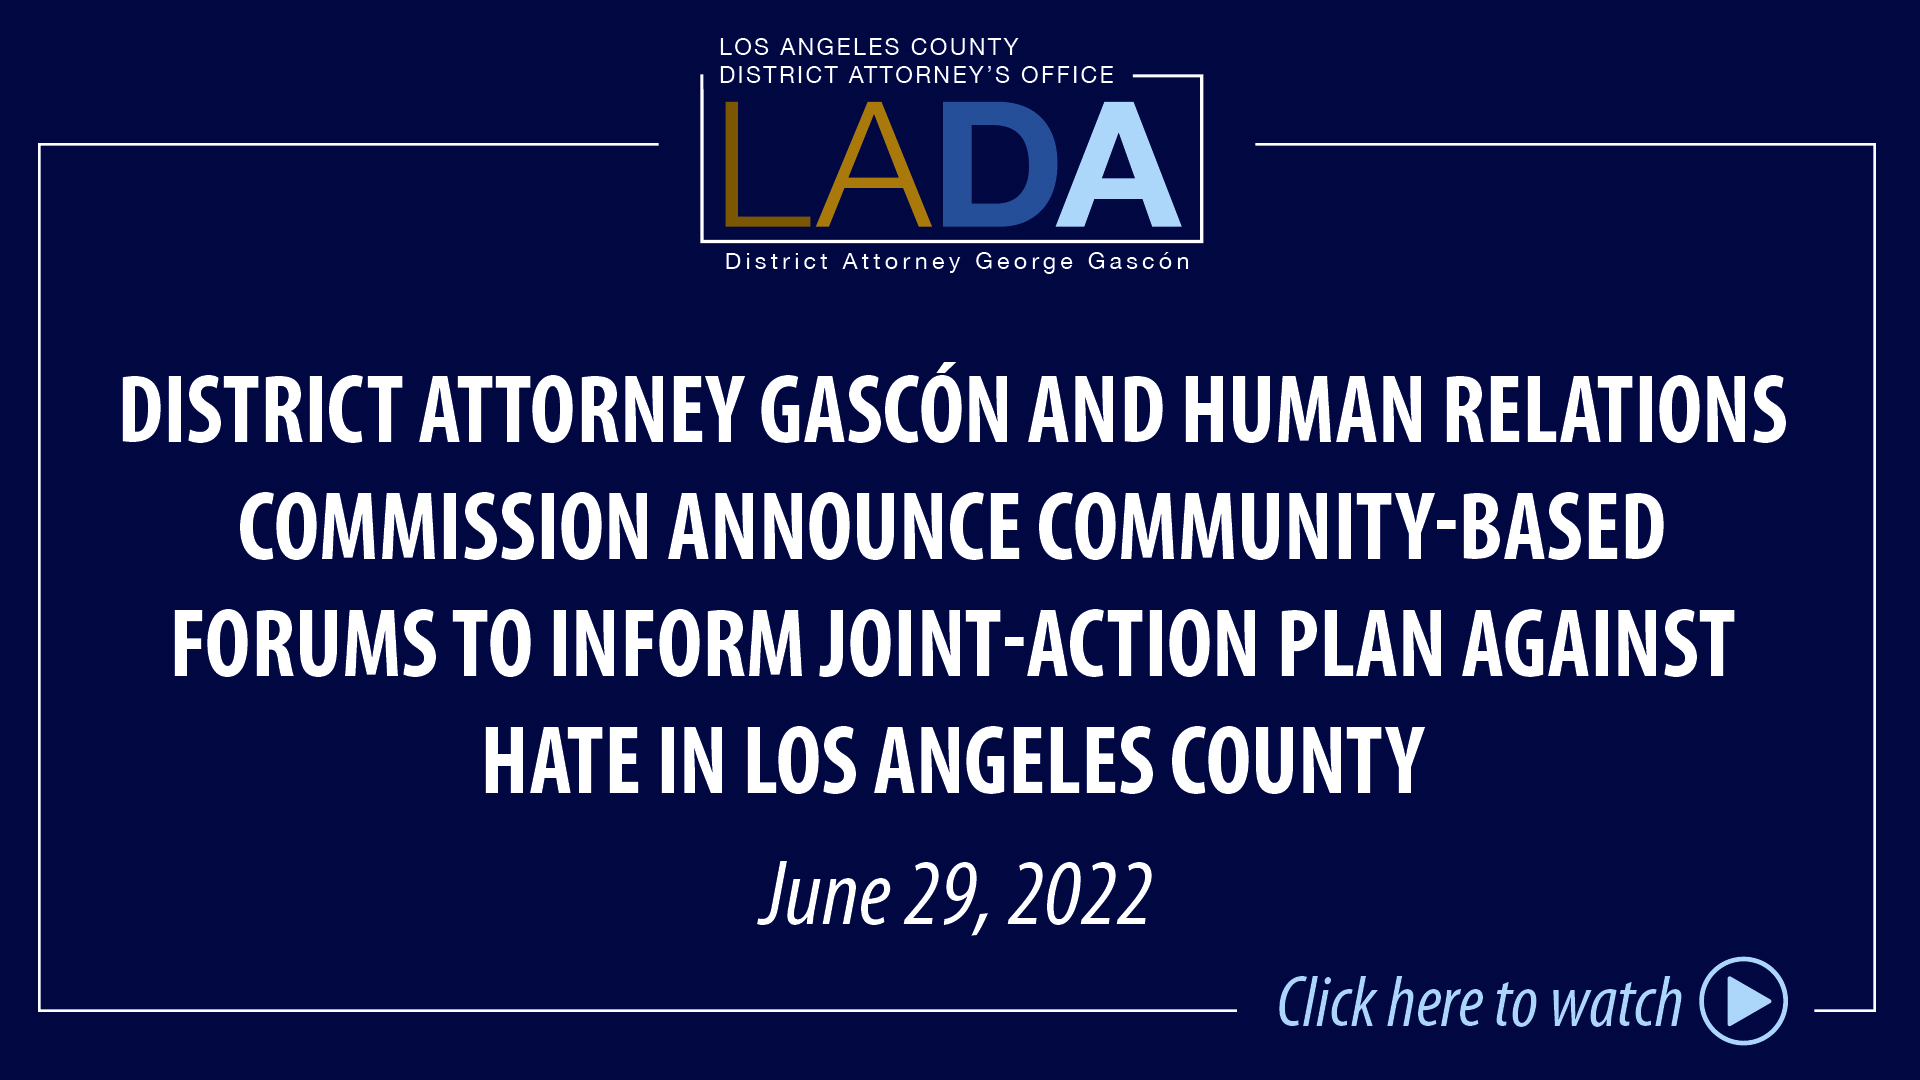 District Attorney Gascón and Human Relations Commission Announce Community-Based Forums to Inform Joint-Action Plan Against Hate in Los Angeles County